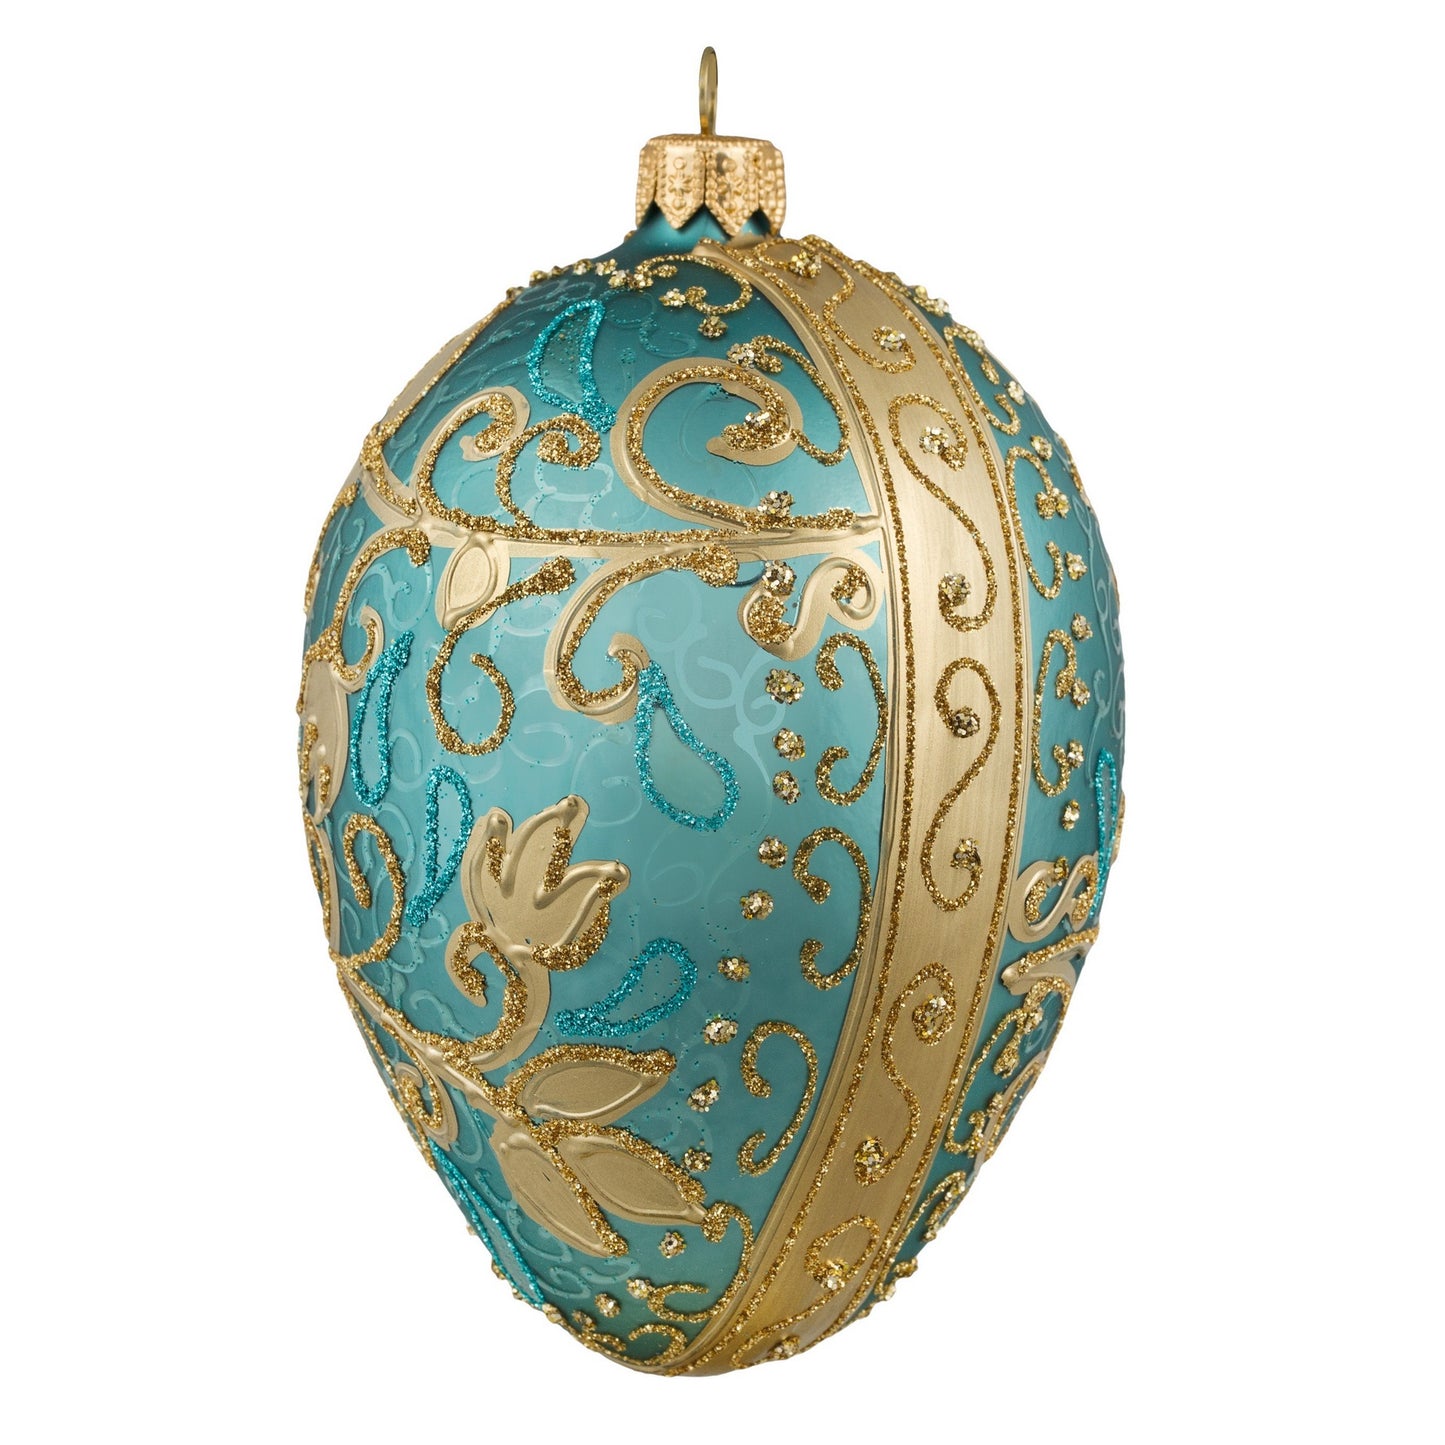 TURQUOISE & GOLD FABERGÉ EGG